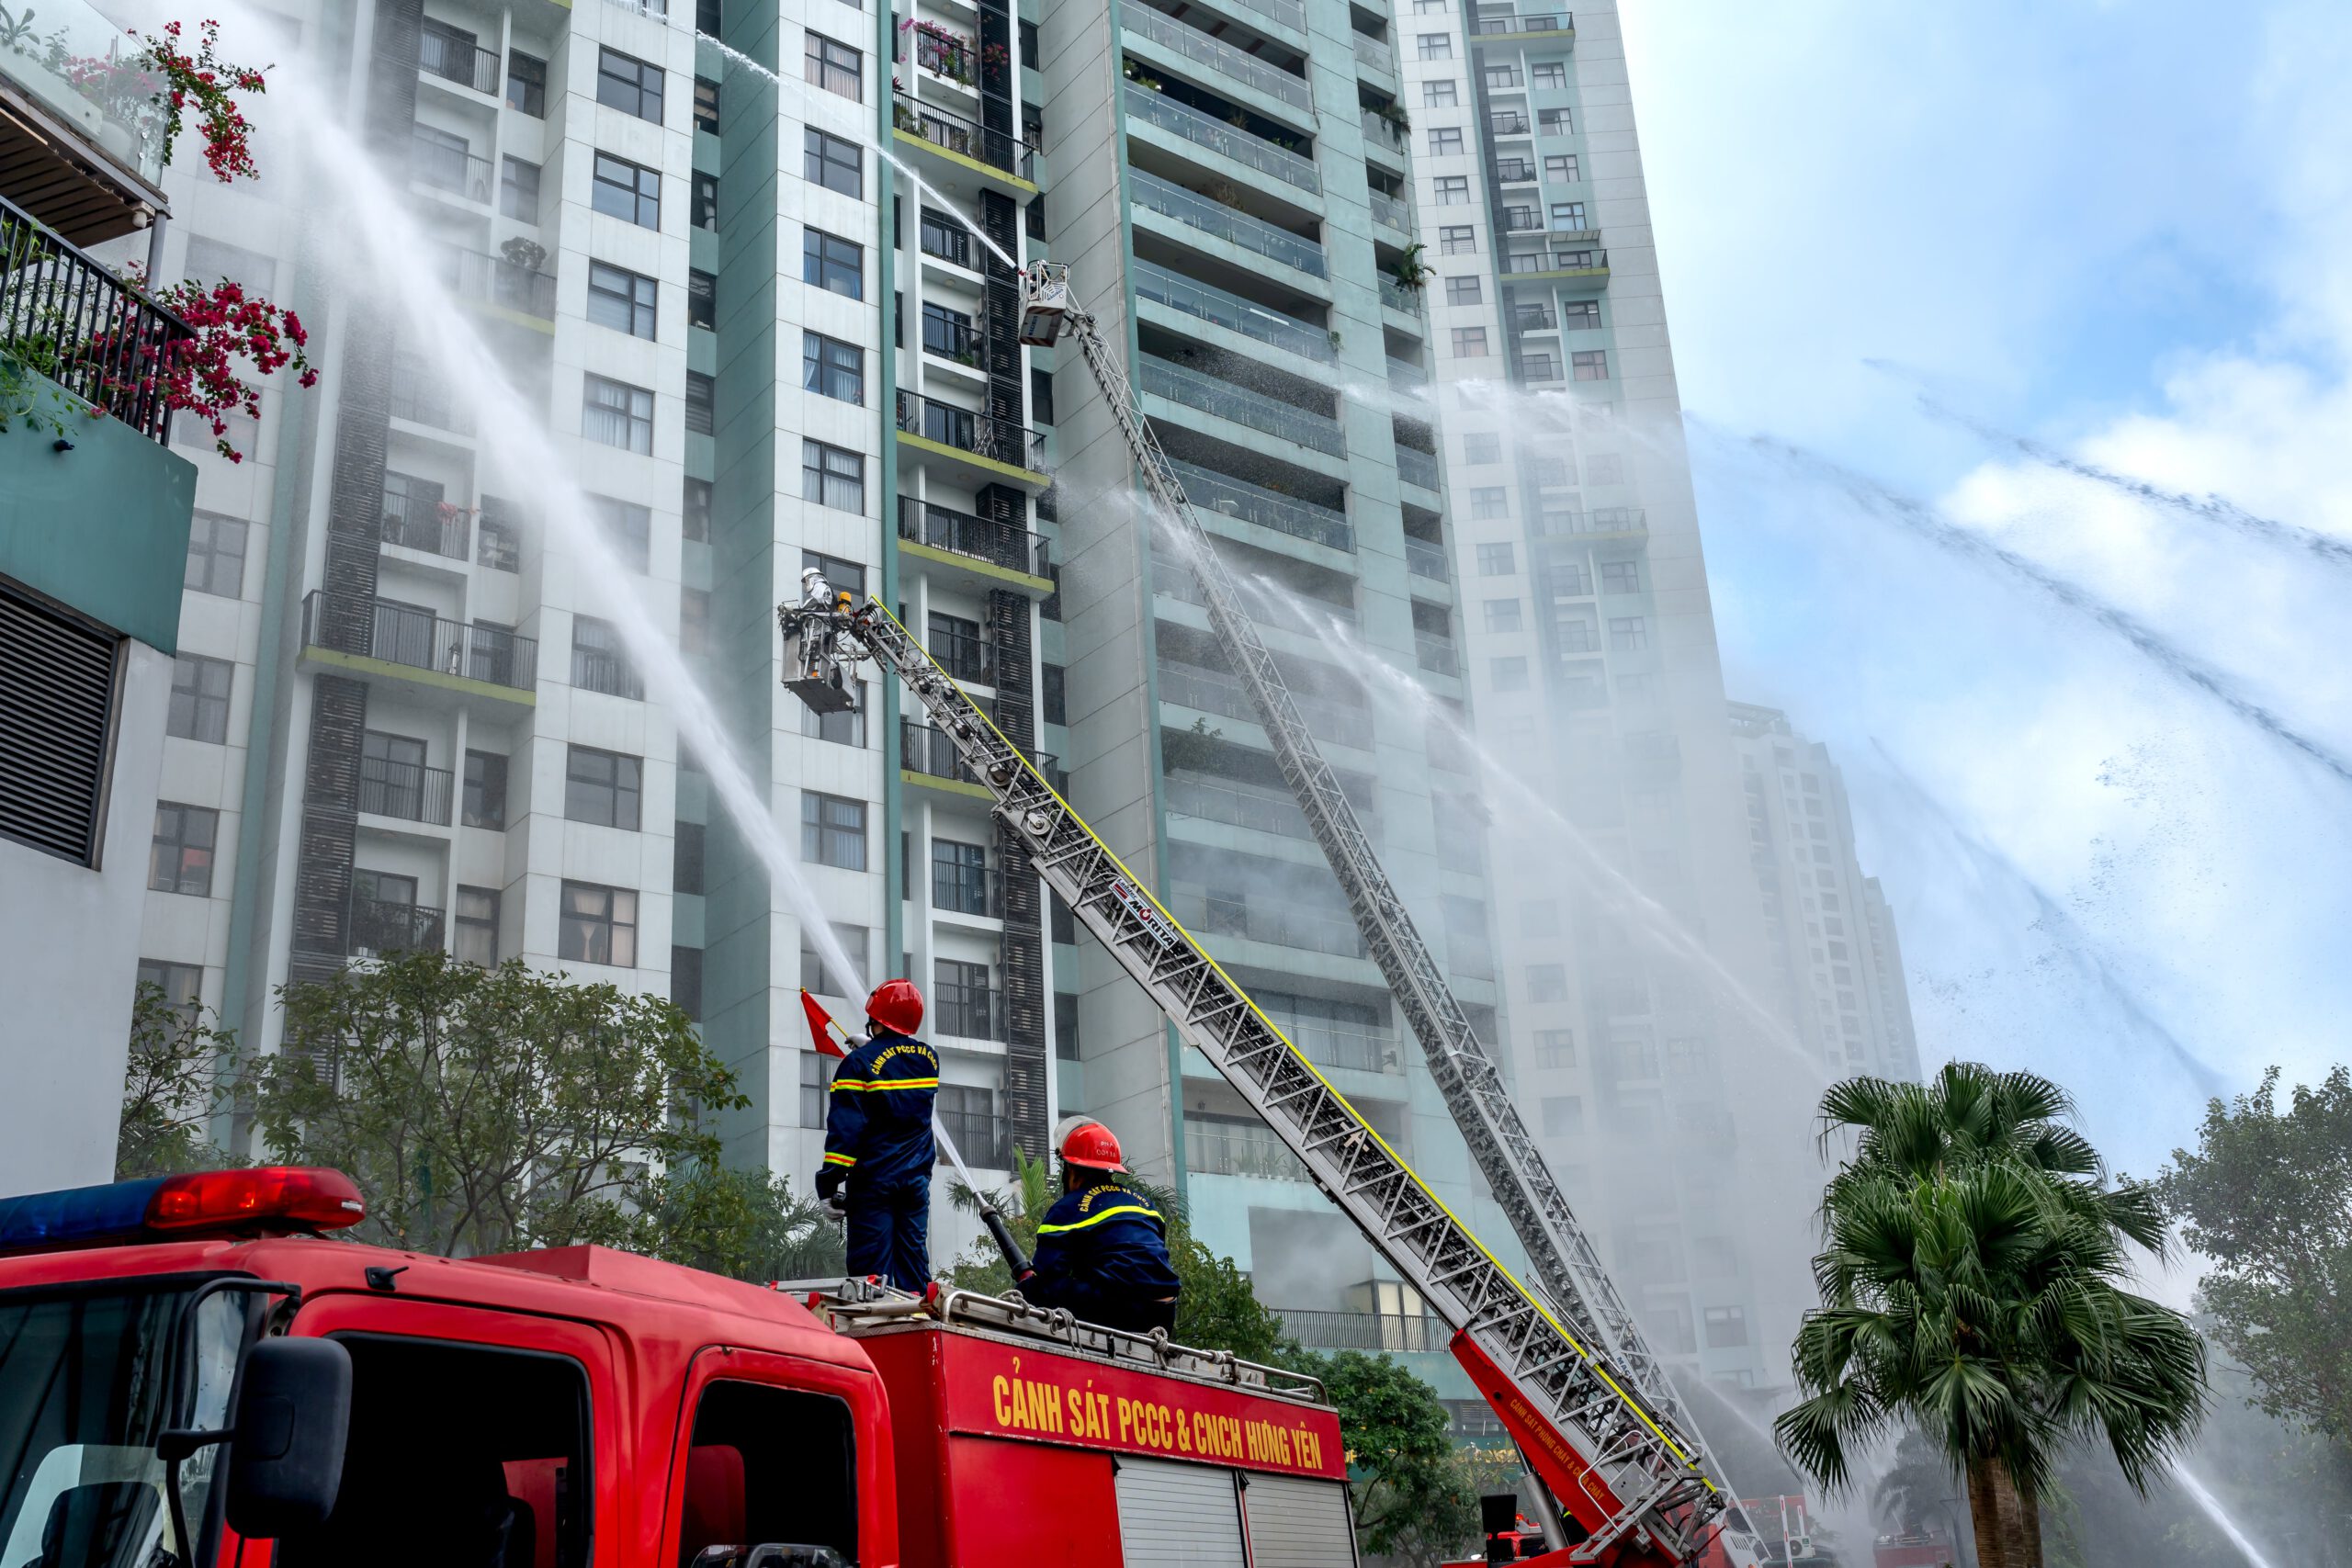 Firemen on Fire Trucks Spraying Water on a High Rises Buildings